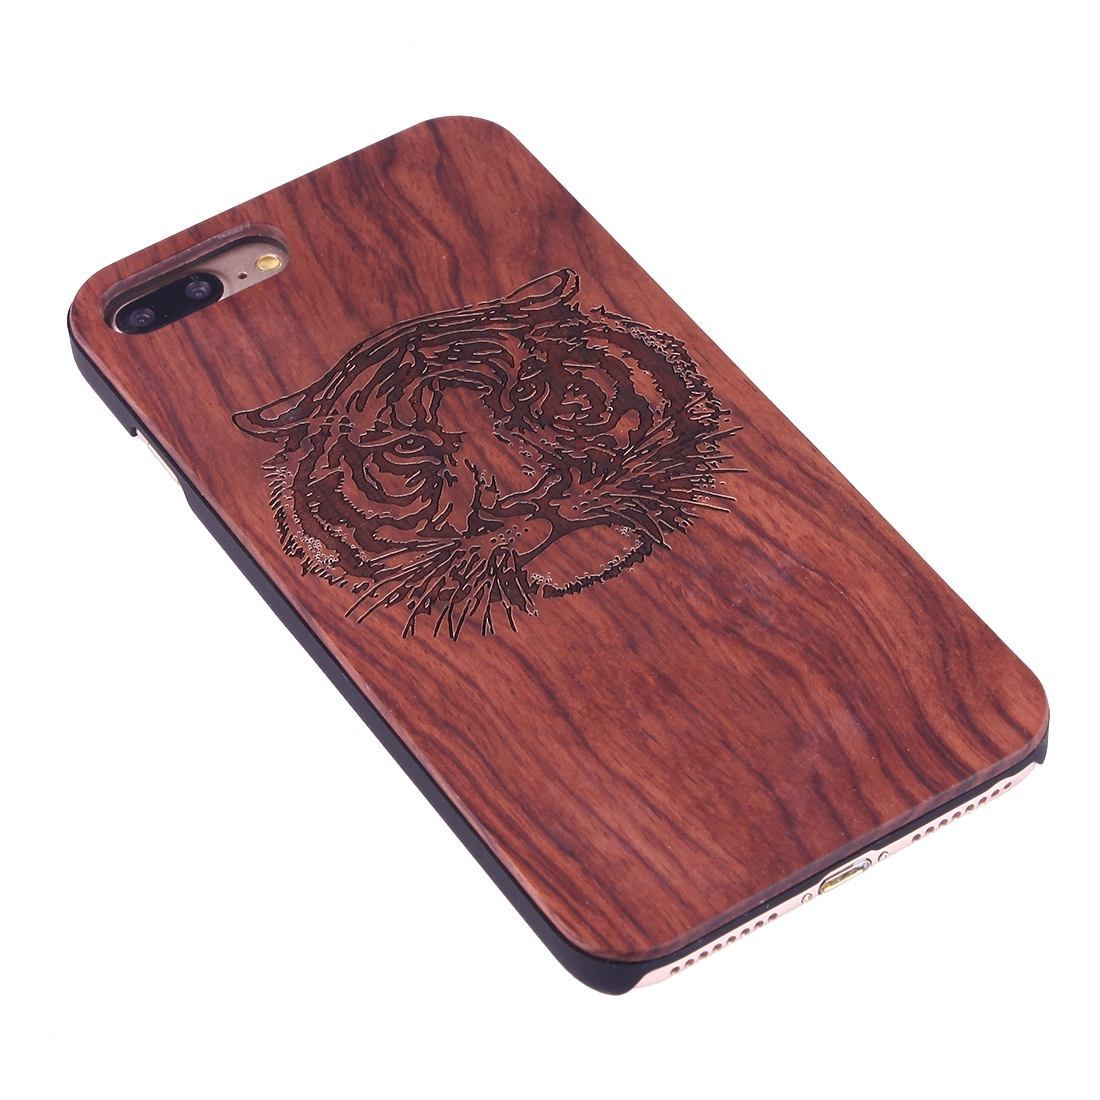 For iPhone 8 PLUS,7 PLUS Case,Rosewood Tiger Head Wooden Durable Shielding Cover